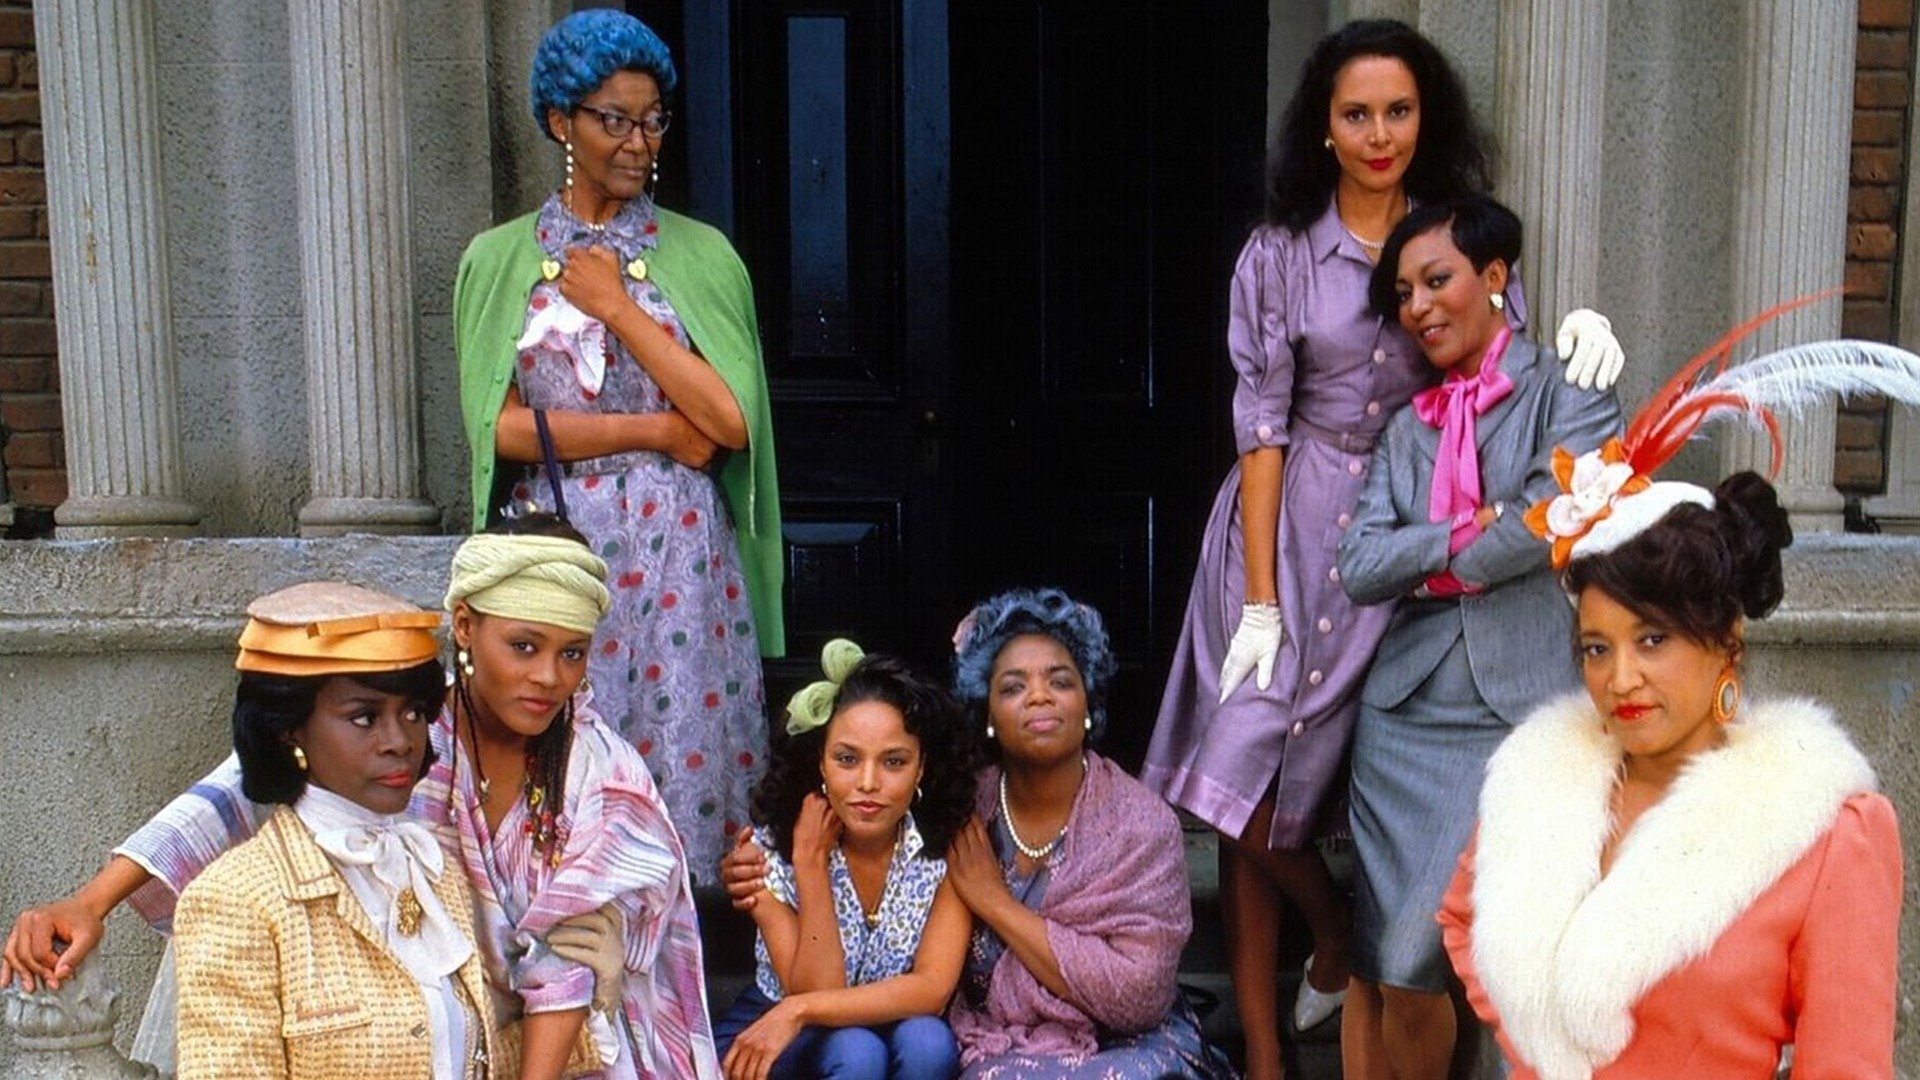 (BPRW) Brown Sugar Celebrates Women's History Month with Movies